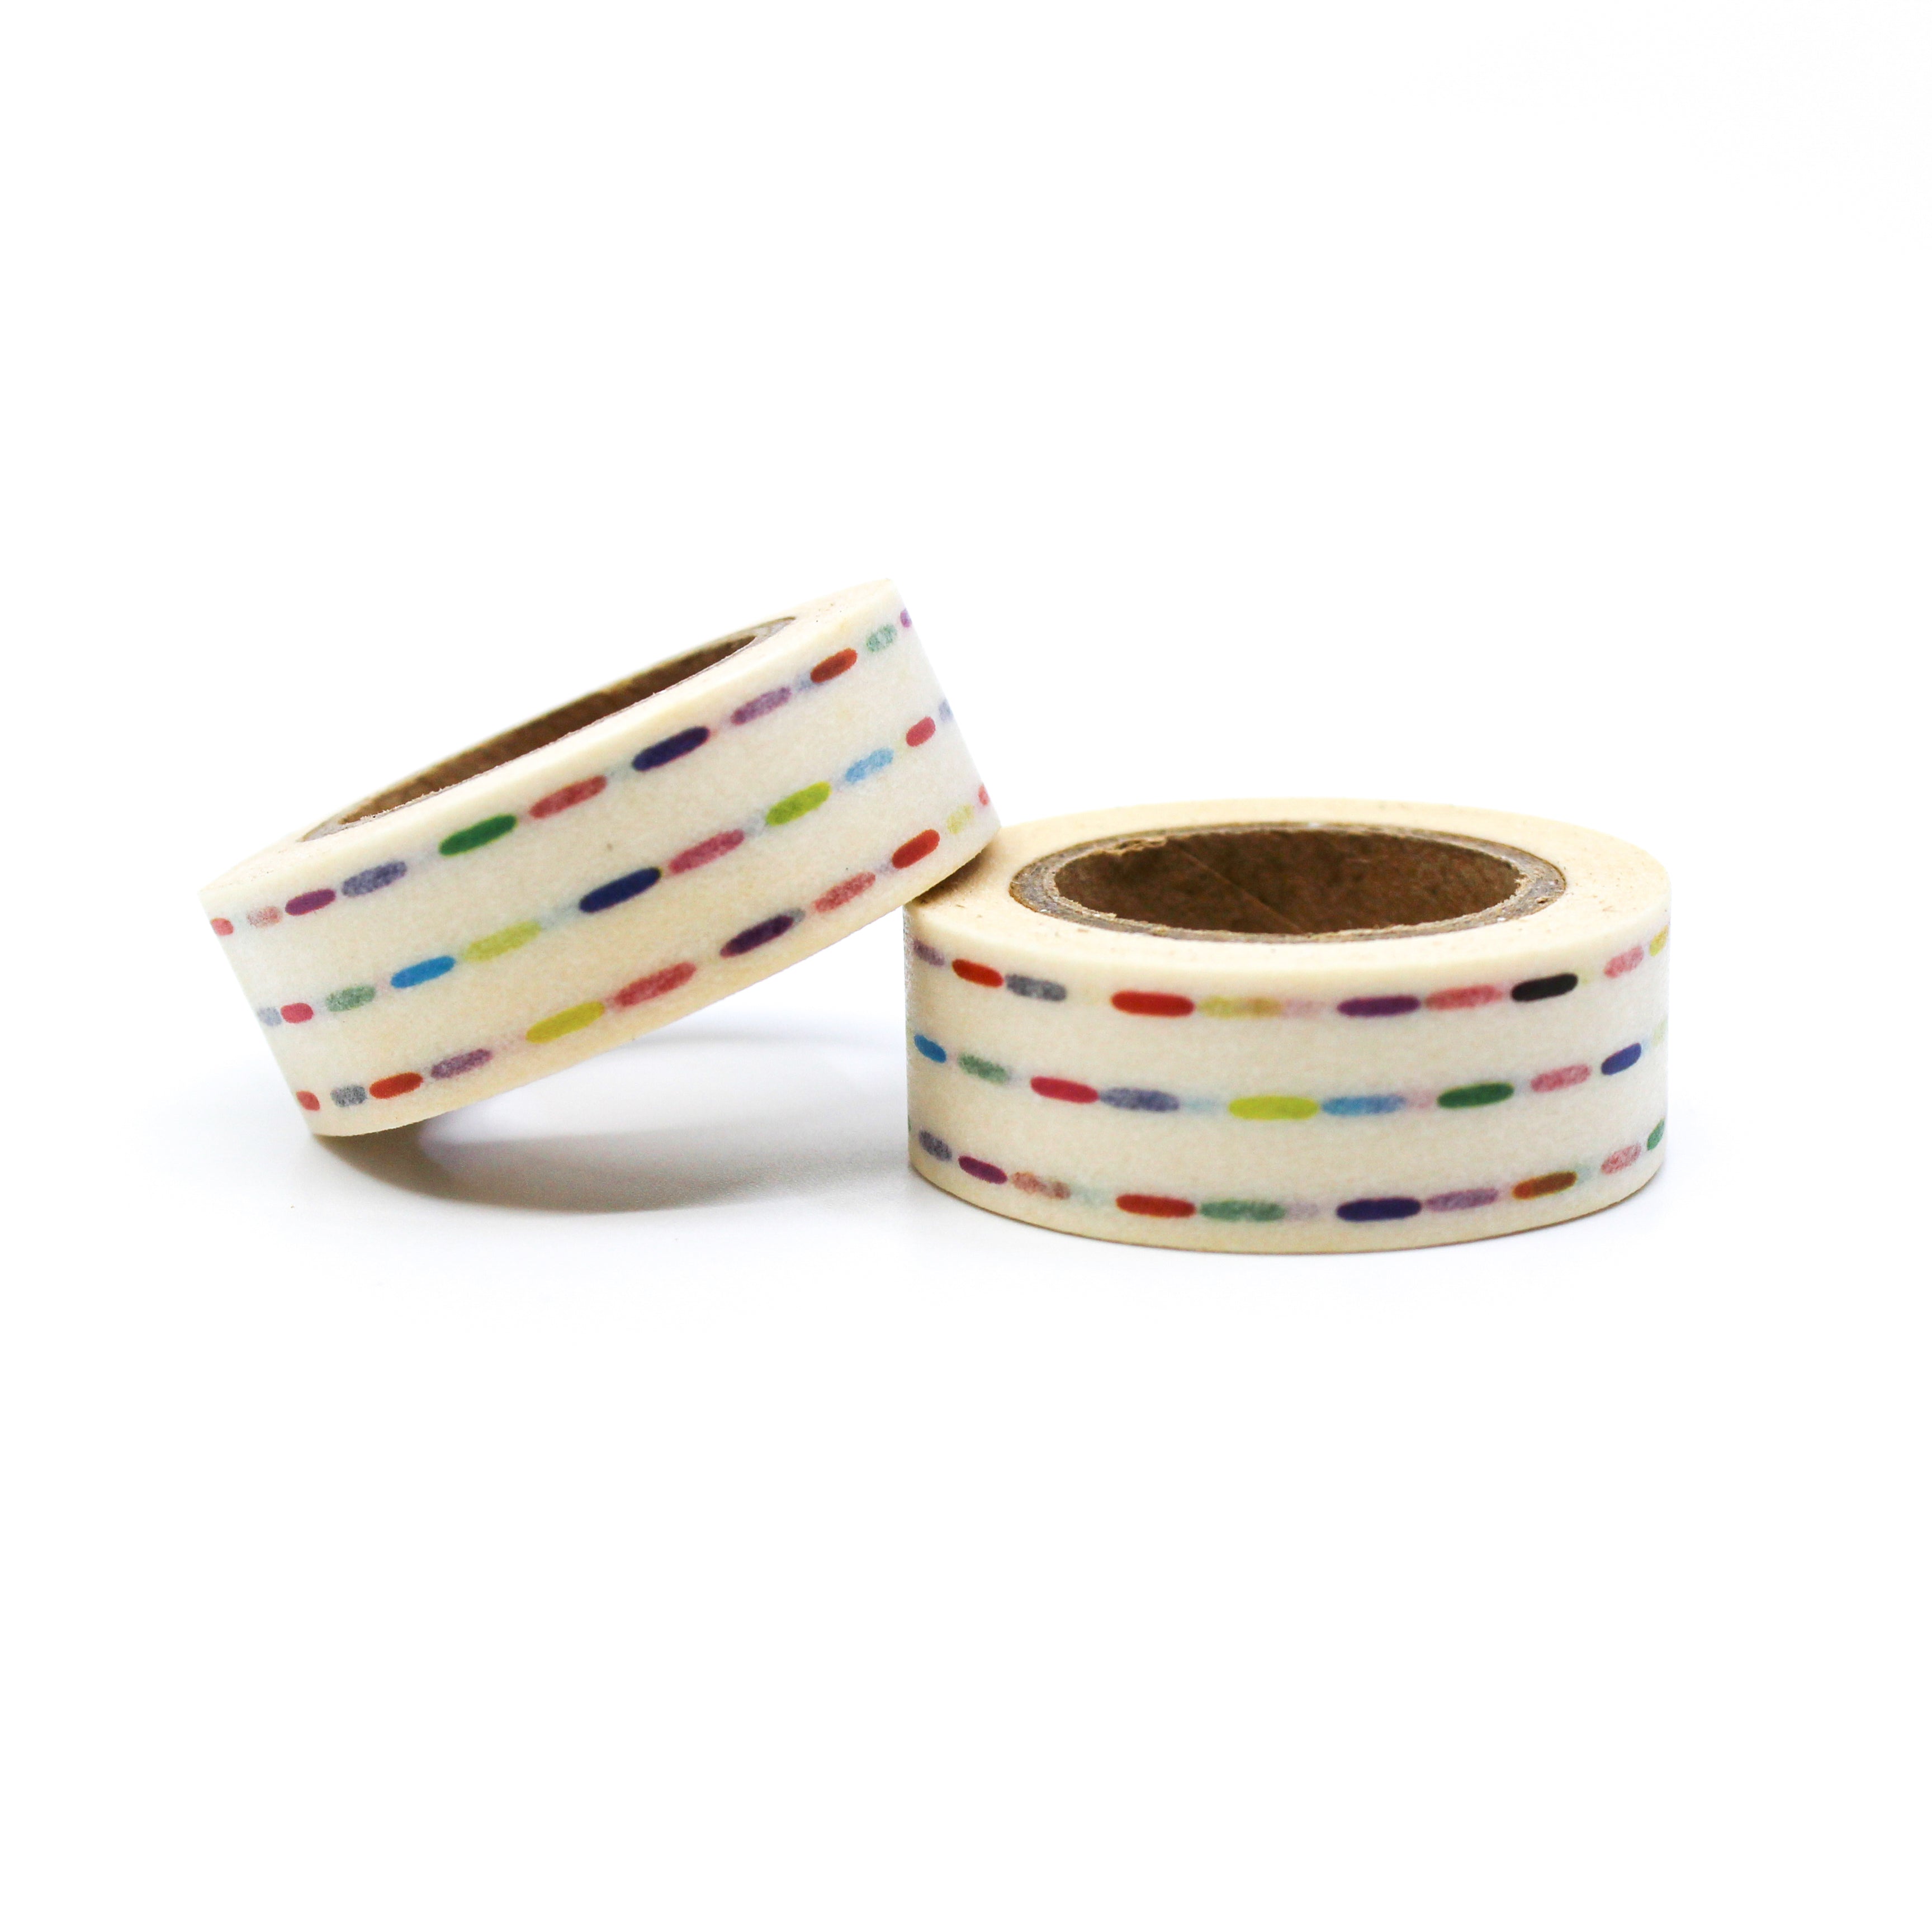 This is a rainbow color dashed lines or dots for Journal Supplies, Scrapbooking washi tapes from BBB Supplies Craft Shop